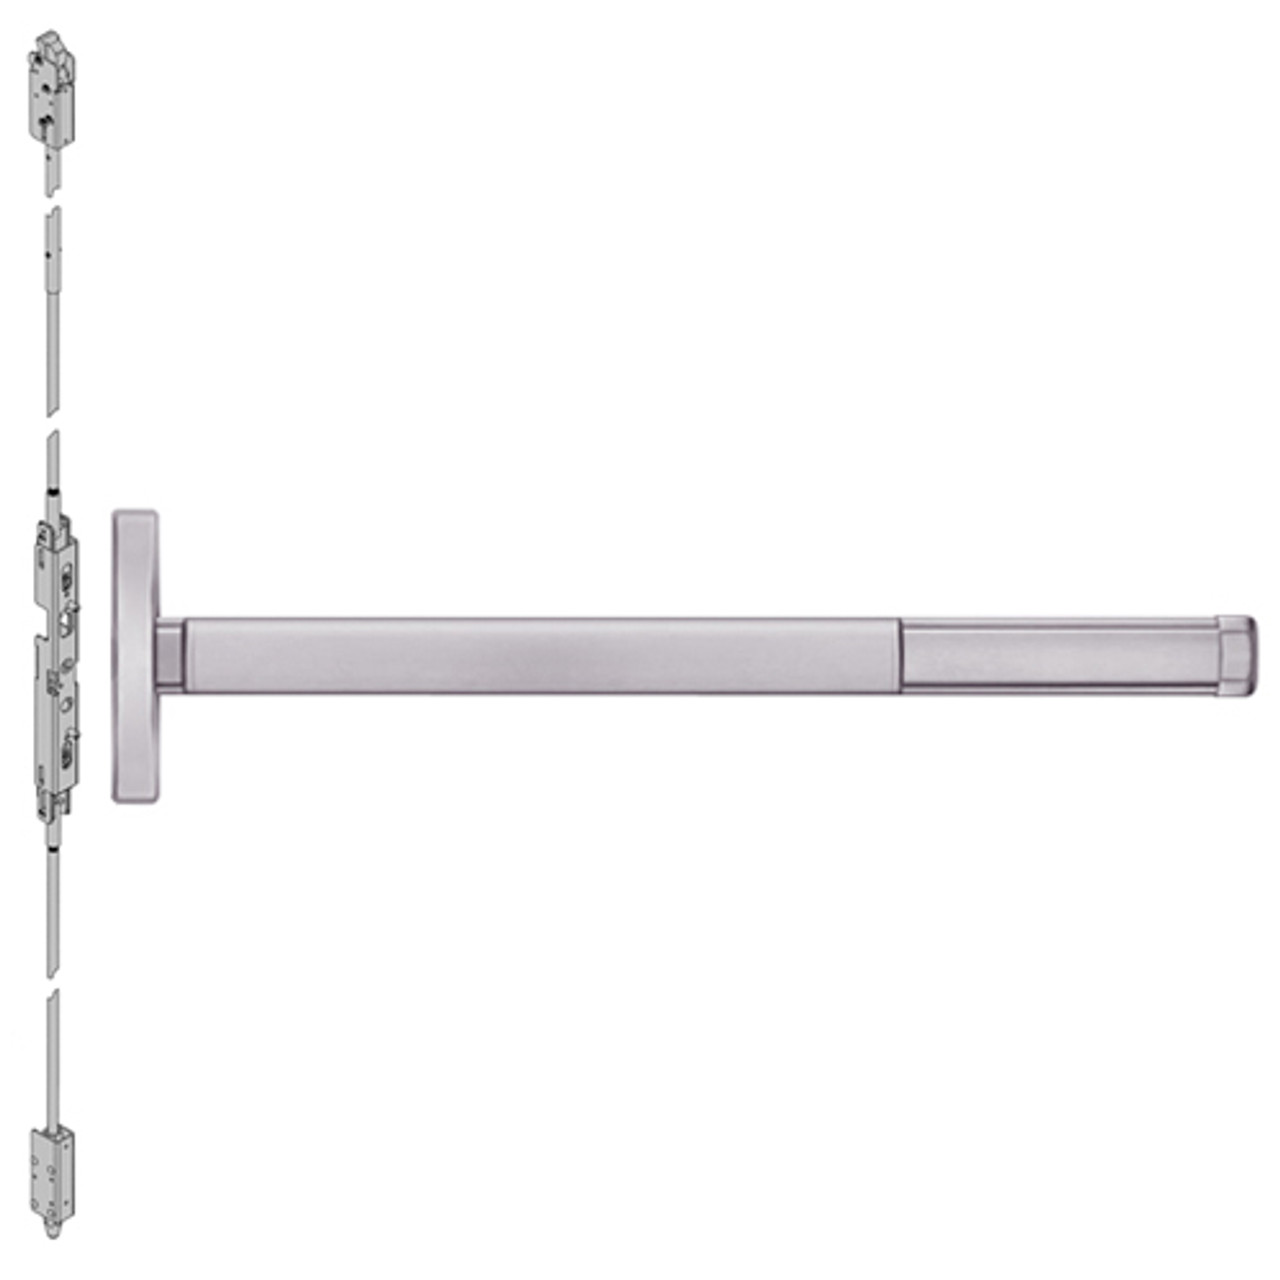 DE2614LBR-630-48 PHI 2600 Series Concealed Vertical Rod Exit Device with Delayed Egress Prepped for Lever Always Active in Satin Stainless Steel Finish